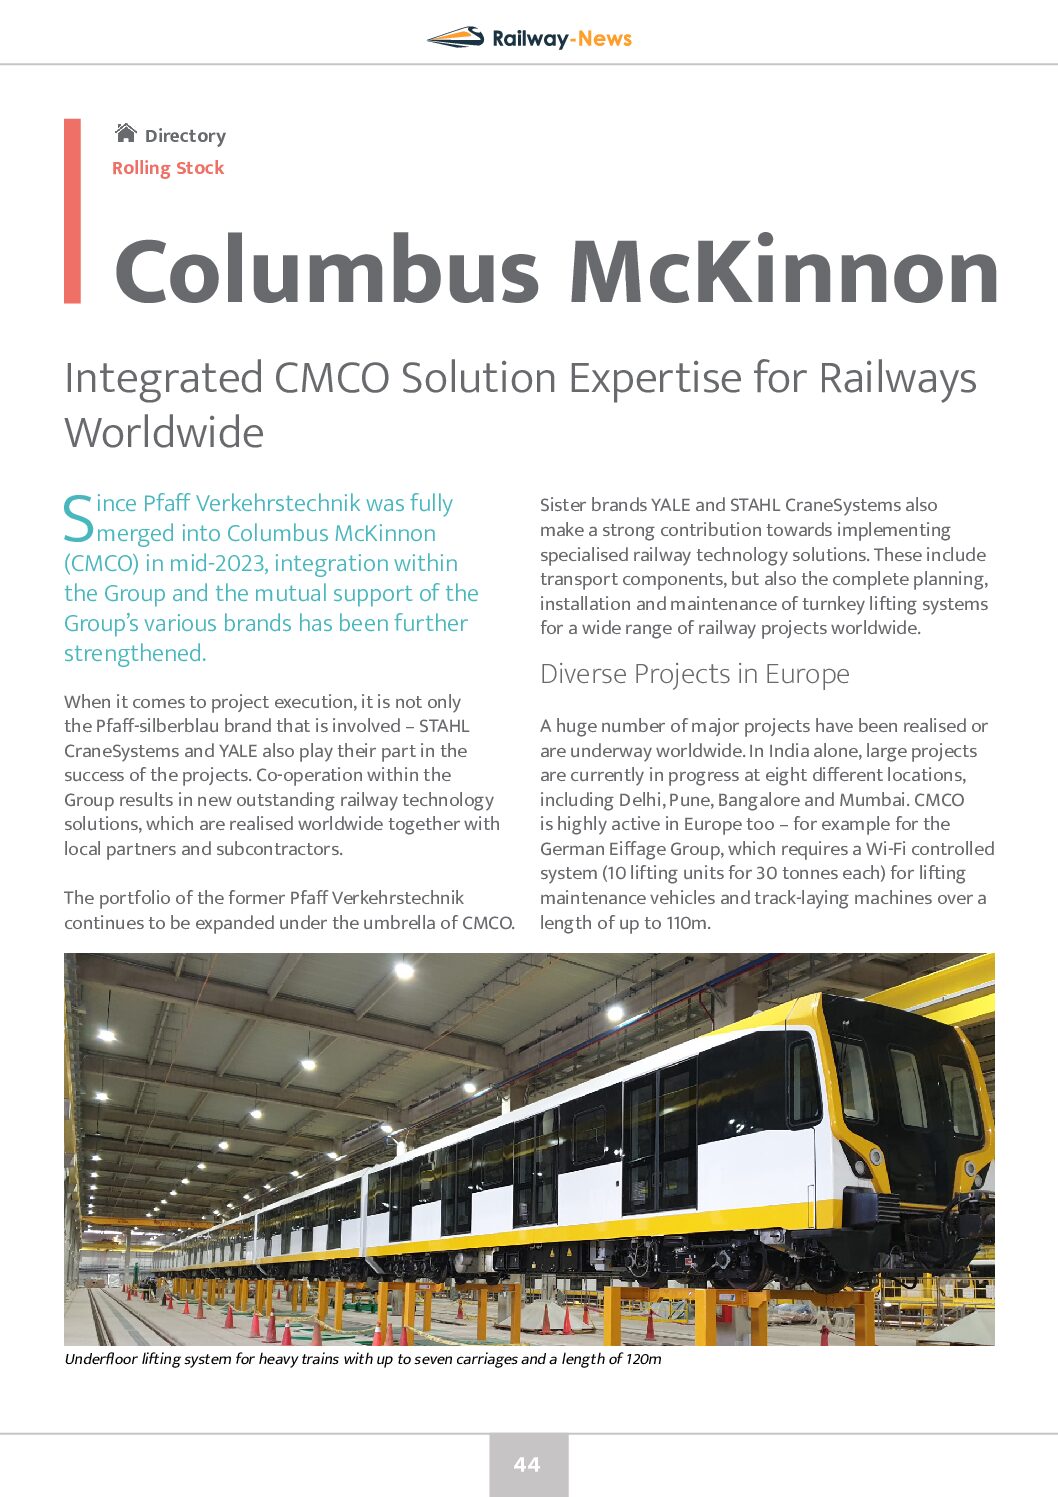 Integrated CMCO Solution Expertise for Railways Worldwide